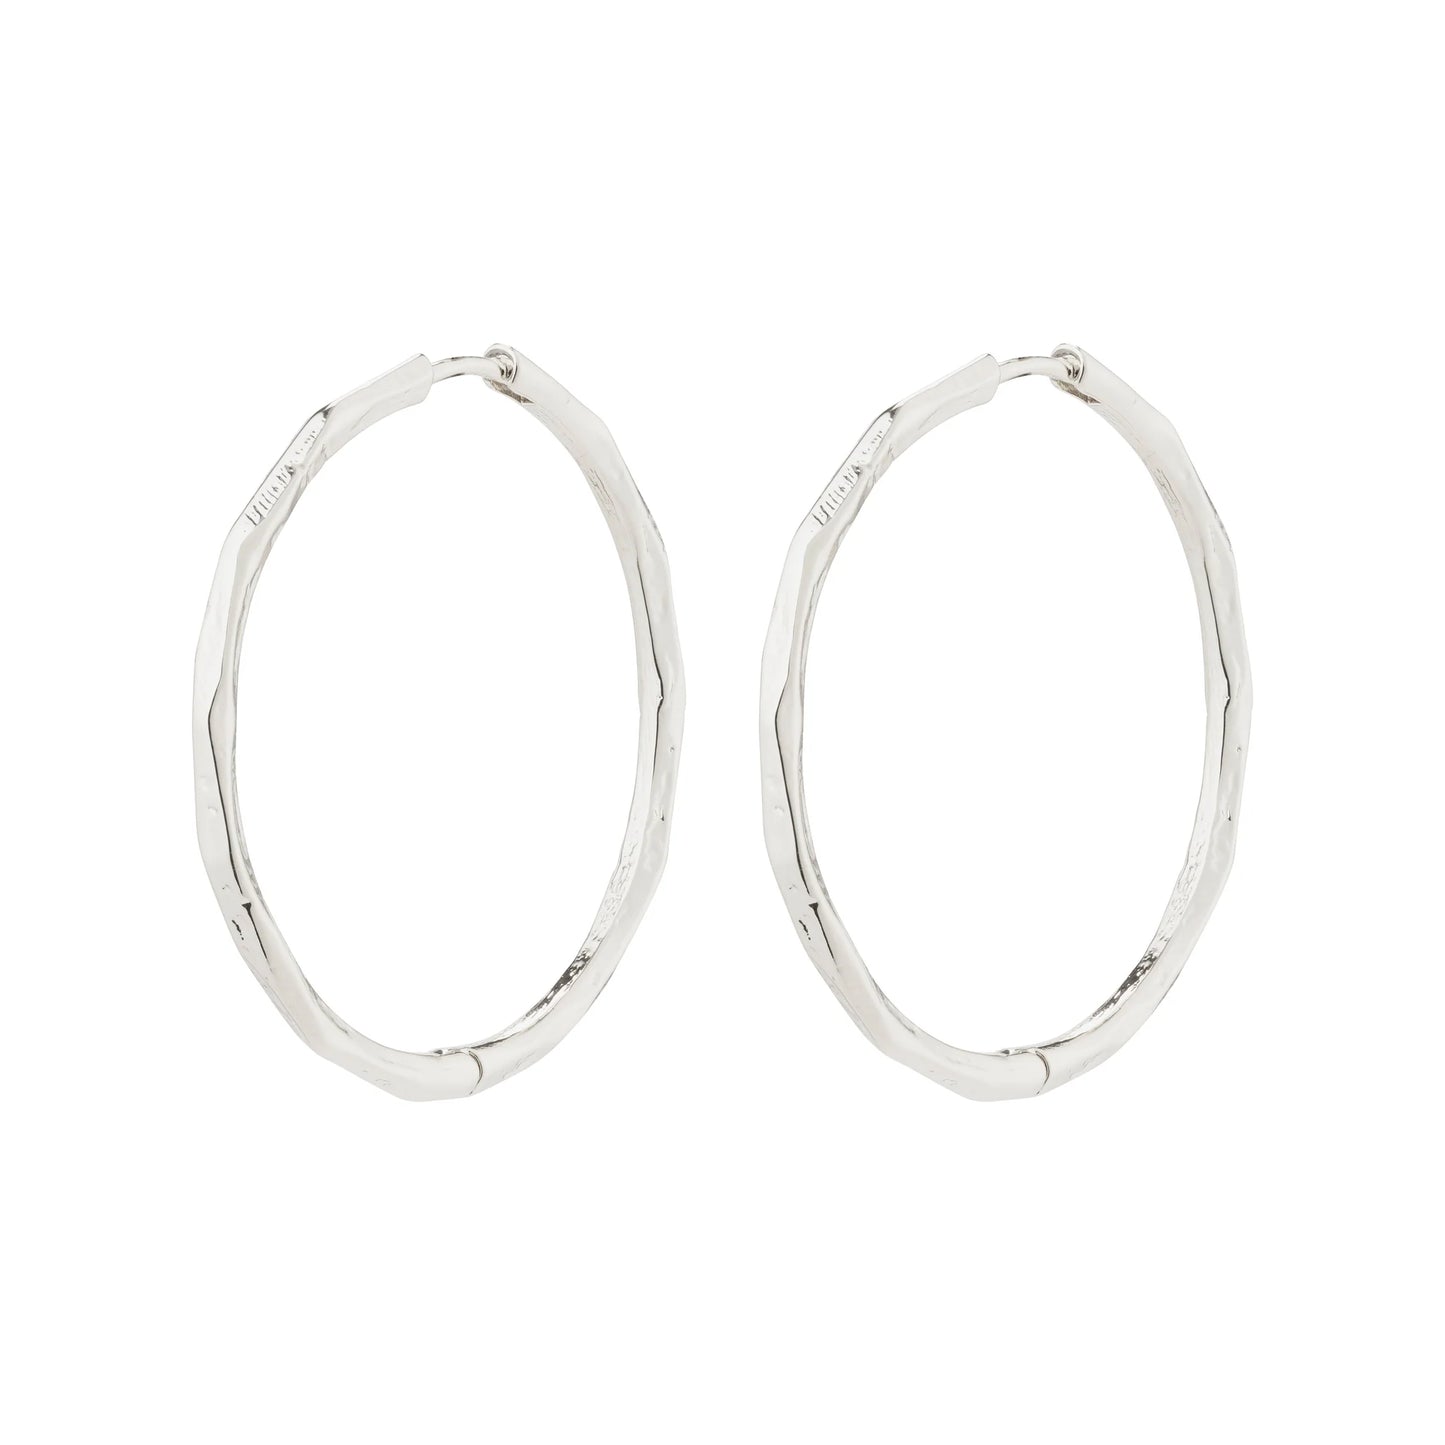 Breathe Recycled Hoop Earrings Gold or Silver-Plated